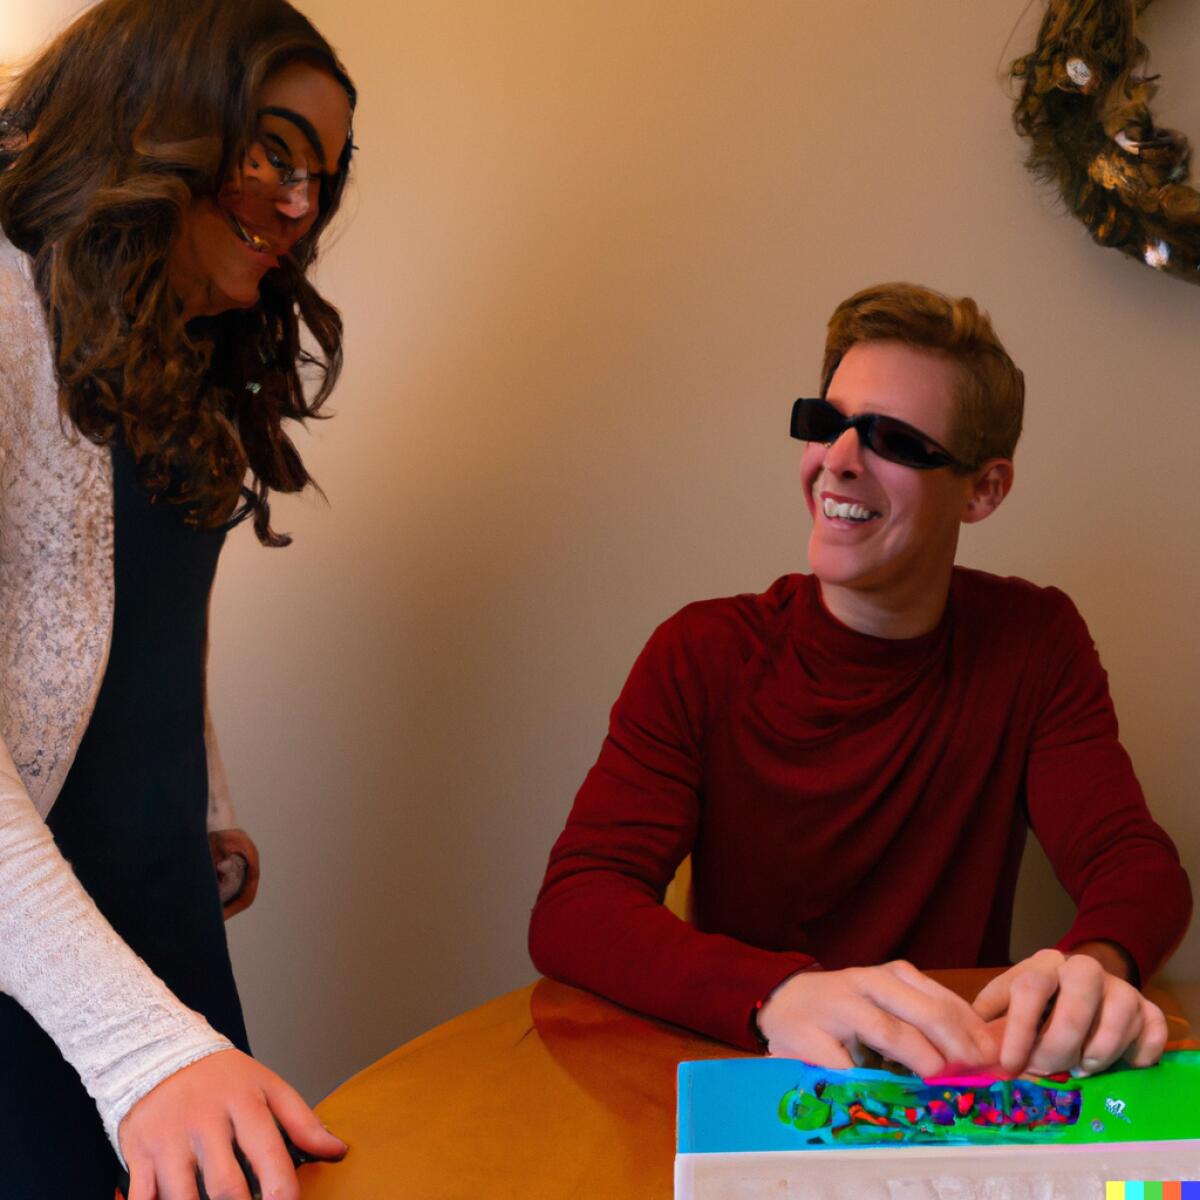 a woman standing next to a man wearing sunglasses and sitting at a table